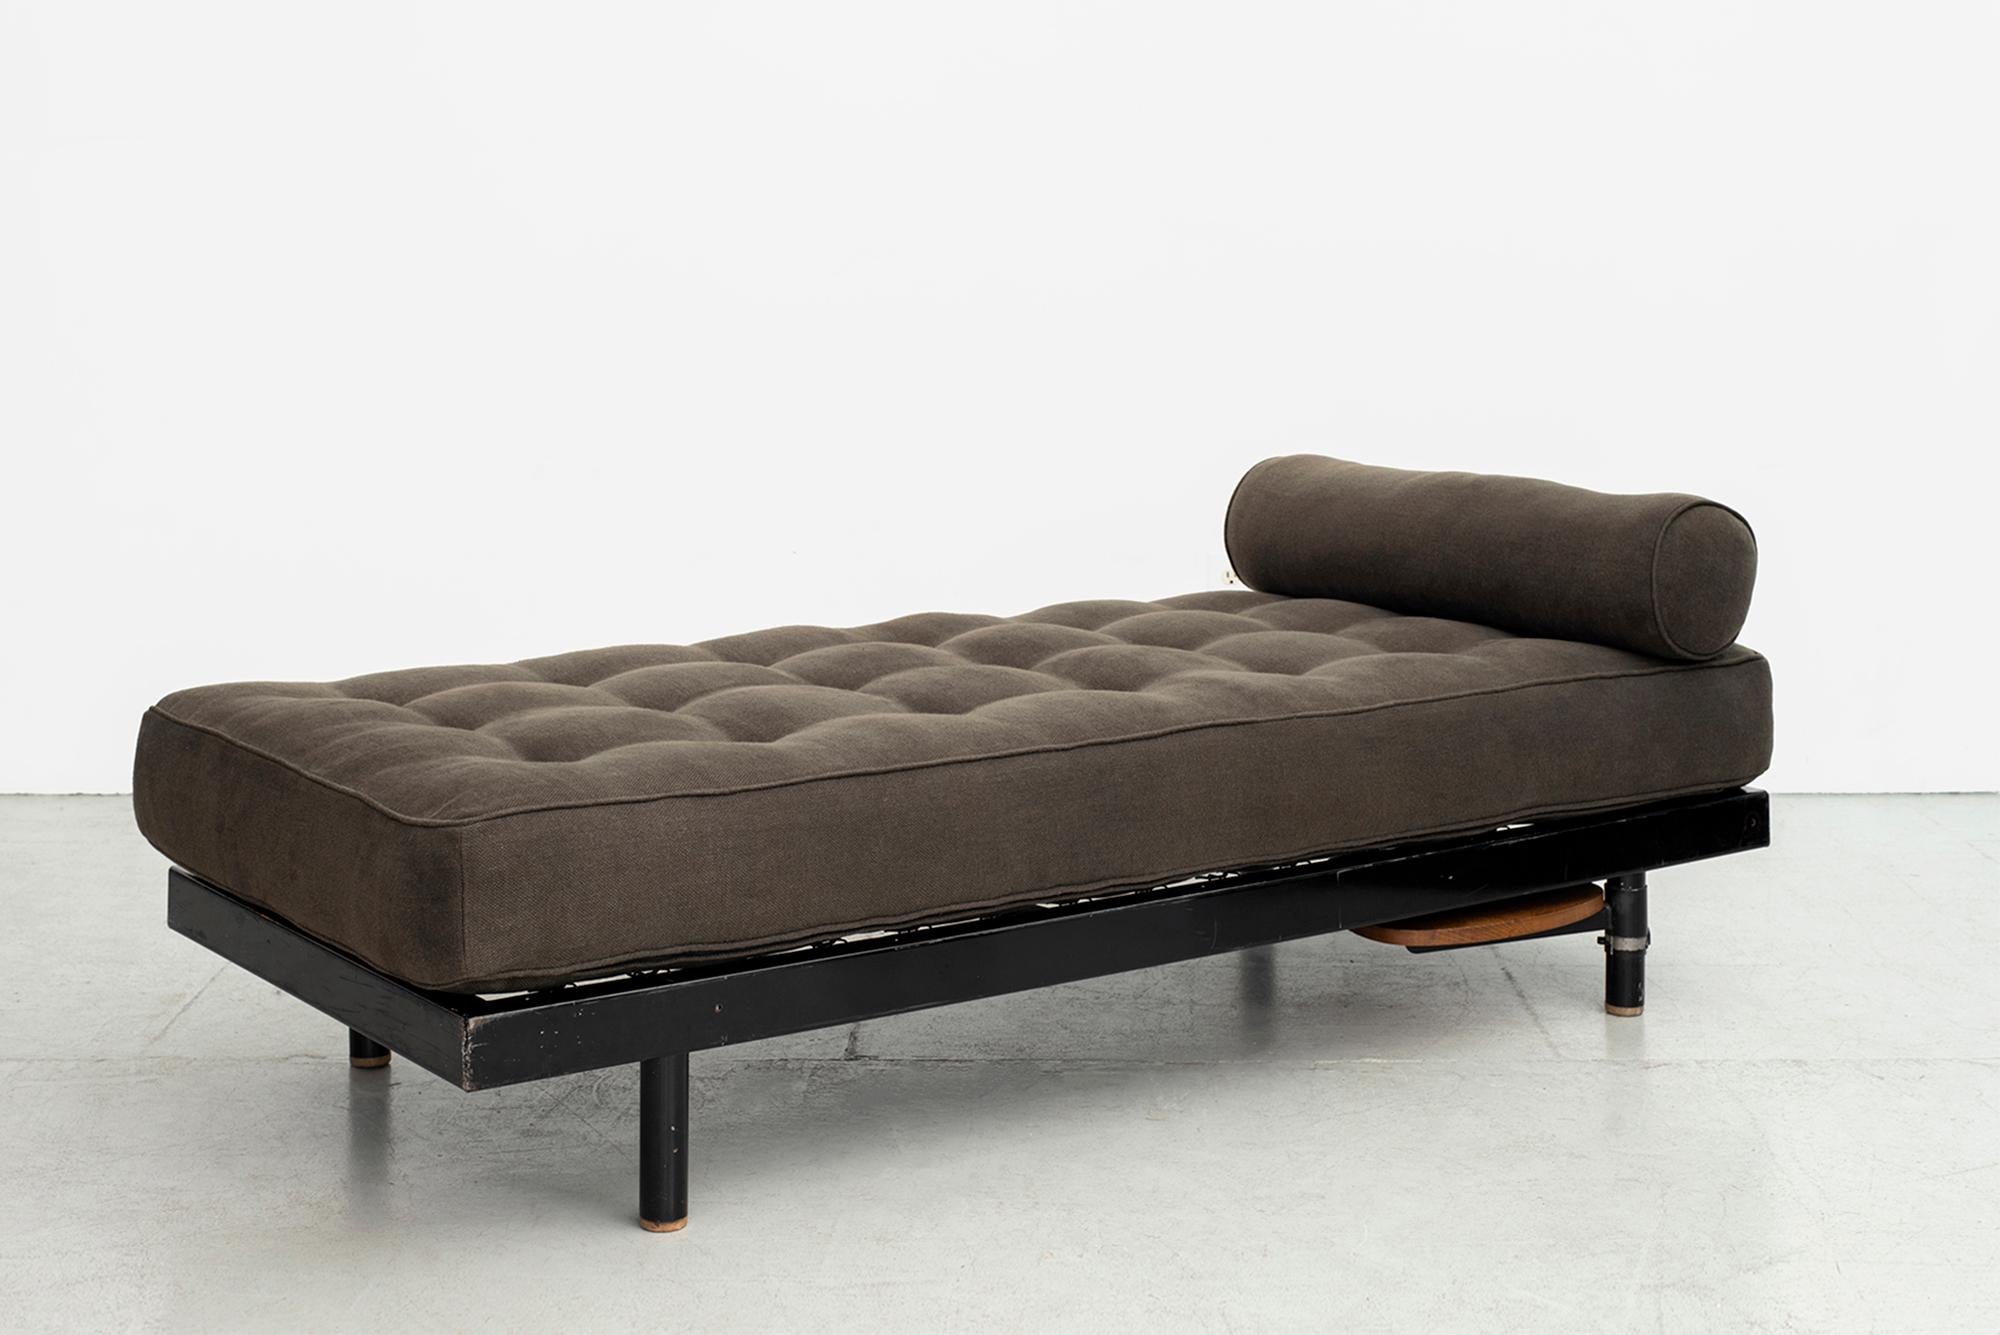 S.C.A.L. Antony daybed with pivoting table designed by Jean Prouvé and Charlotte Perriand. Manufactured by Ateliers Prouvé, France, circa 1952.
Newly upholstered.